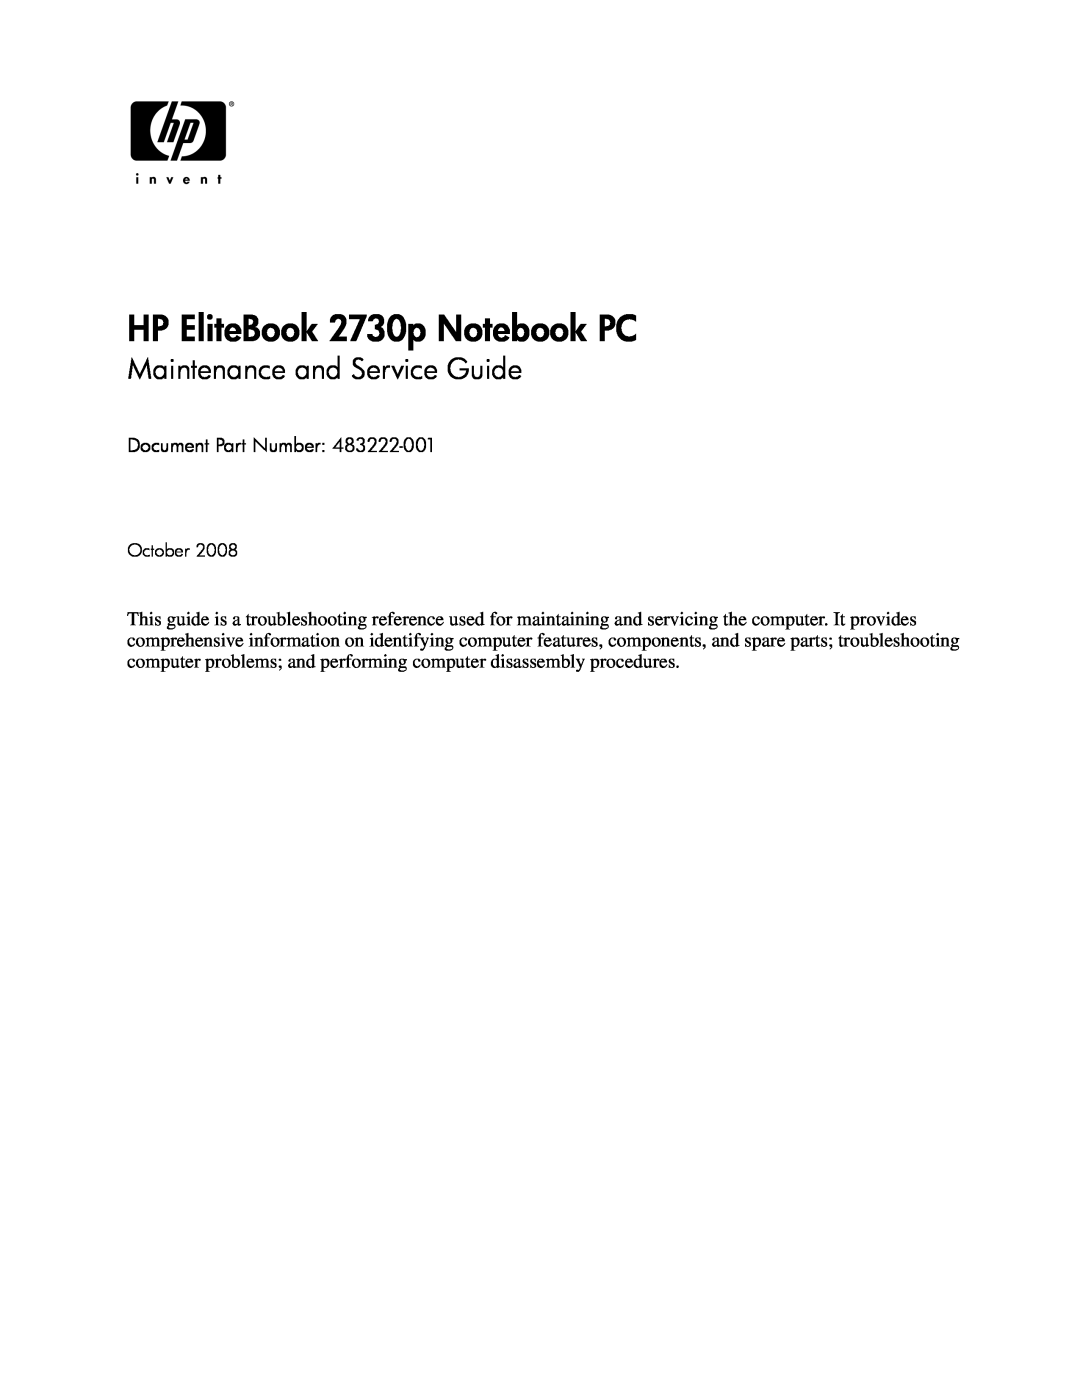 Hitachi 2730P manual HP EliteBook 2730p Notebook PC, Maintenance and Service Guide, Document Part Number, October 